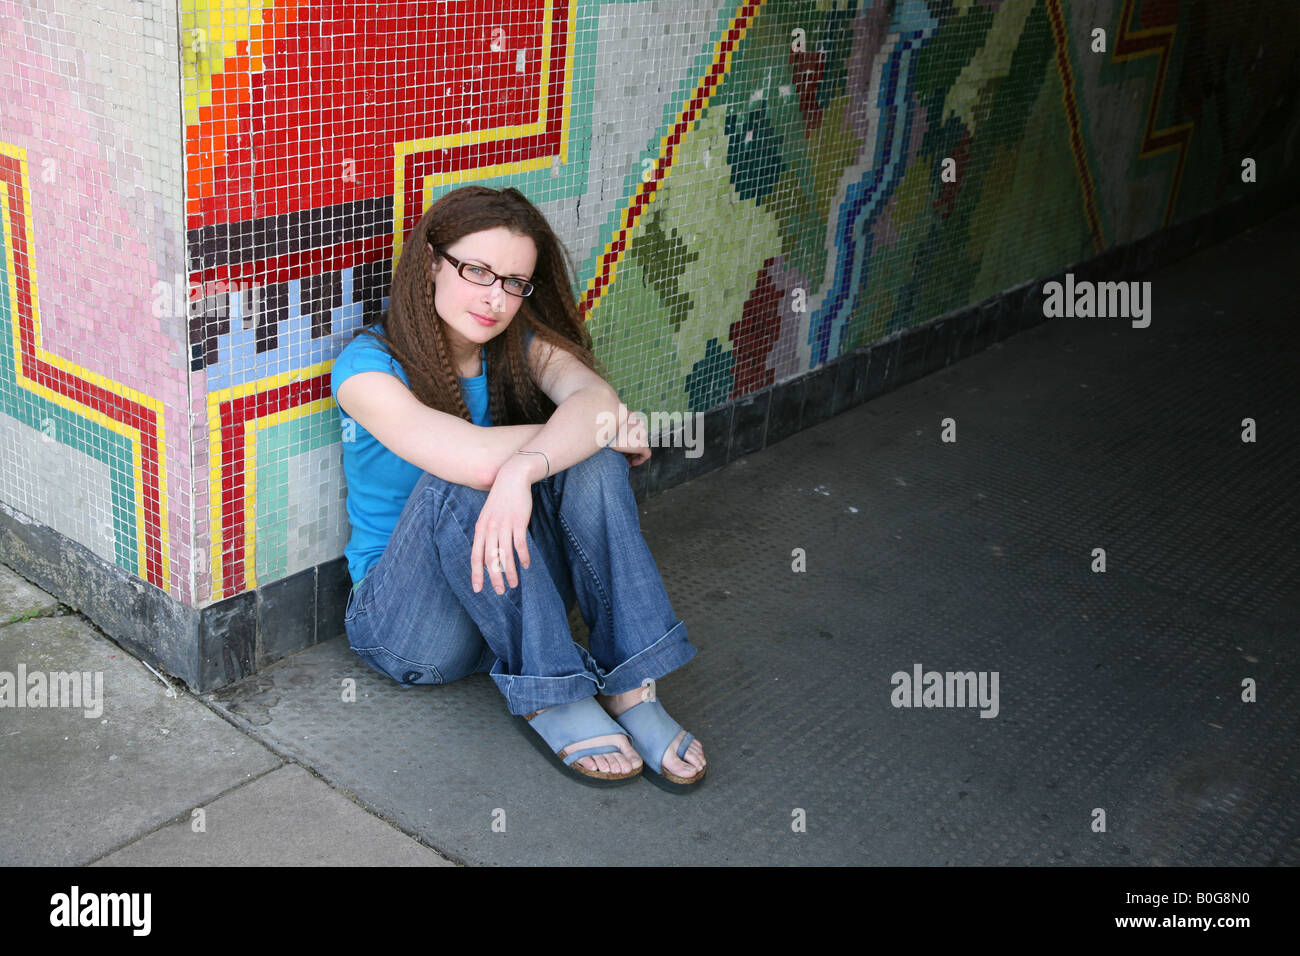 Caucasian female teenage looking upset sitting on the floor of a graffiti covered underpass on a council estate Stock Photo